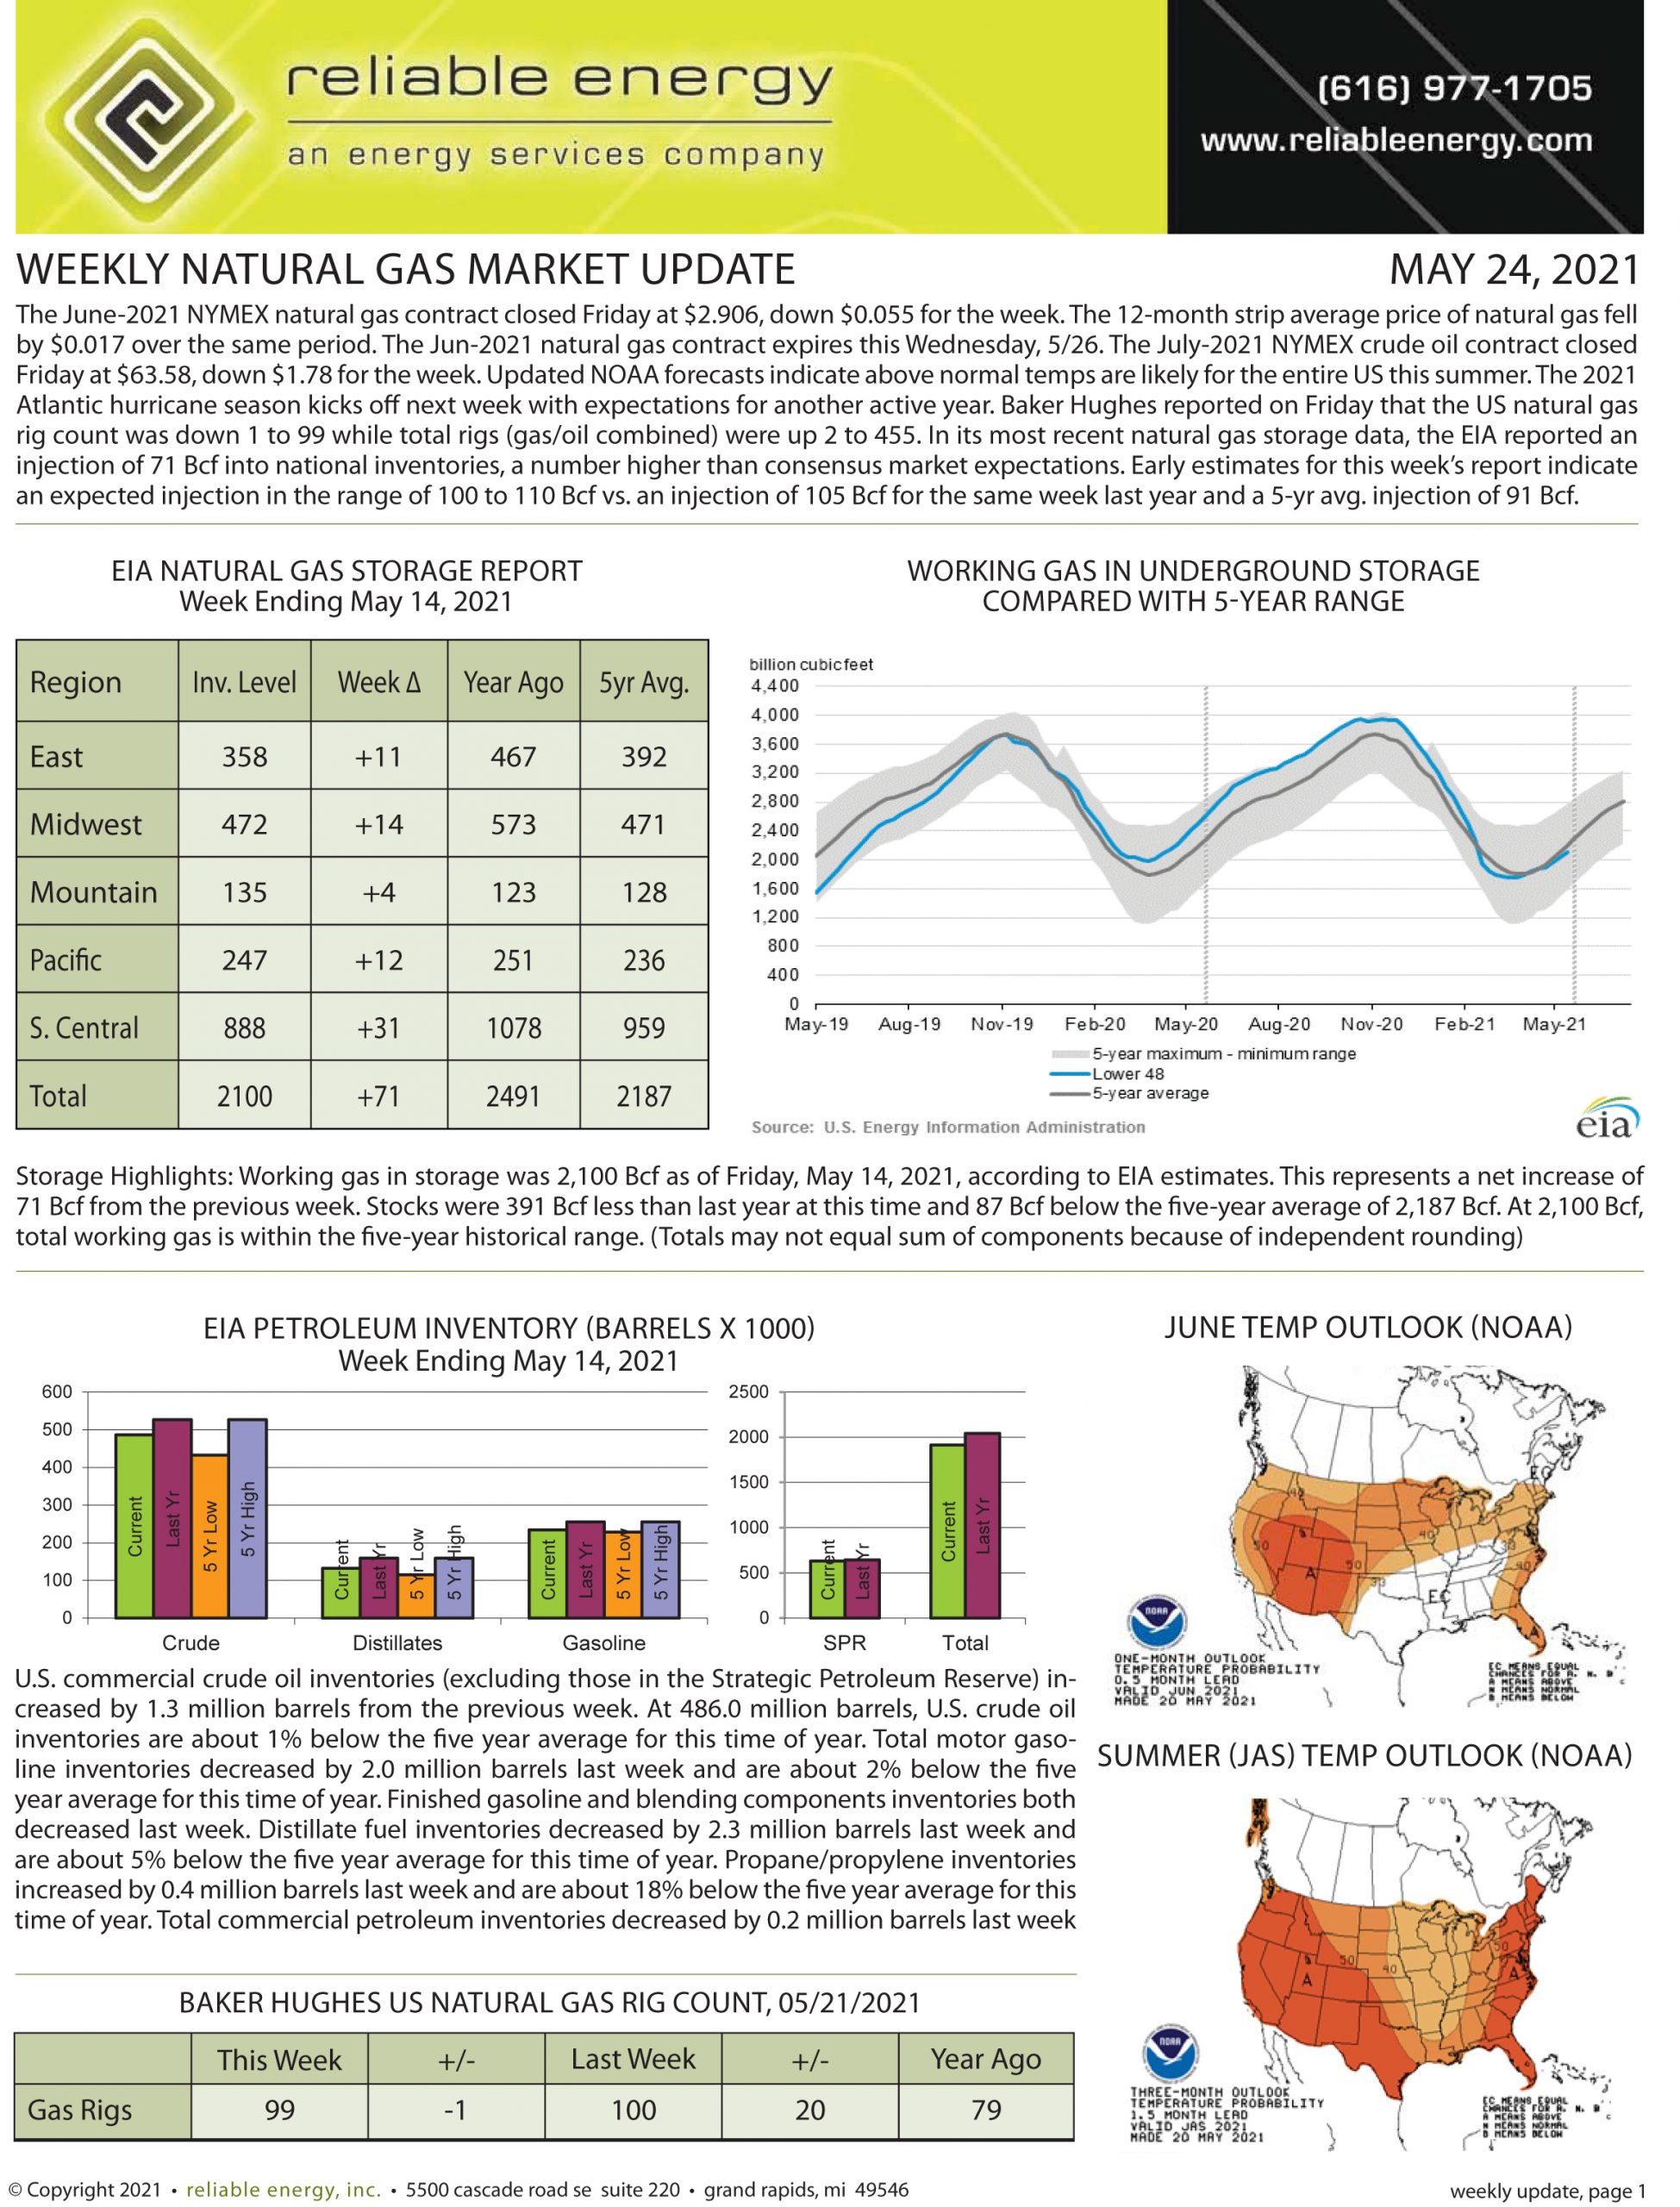 Natural Gas Market Update – May 24, 2021